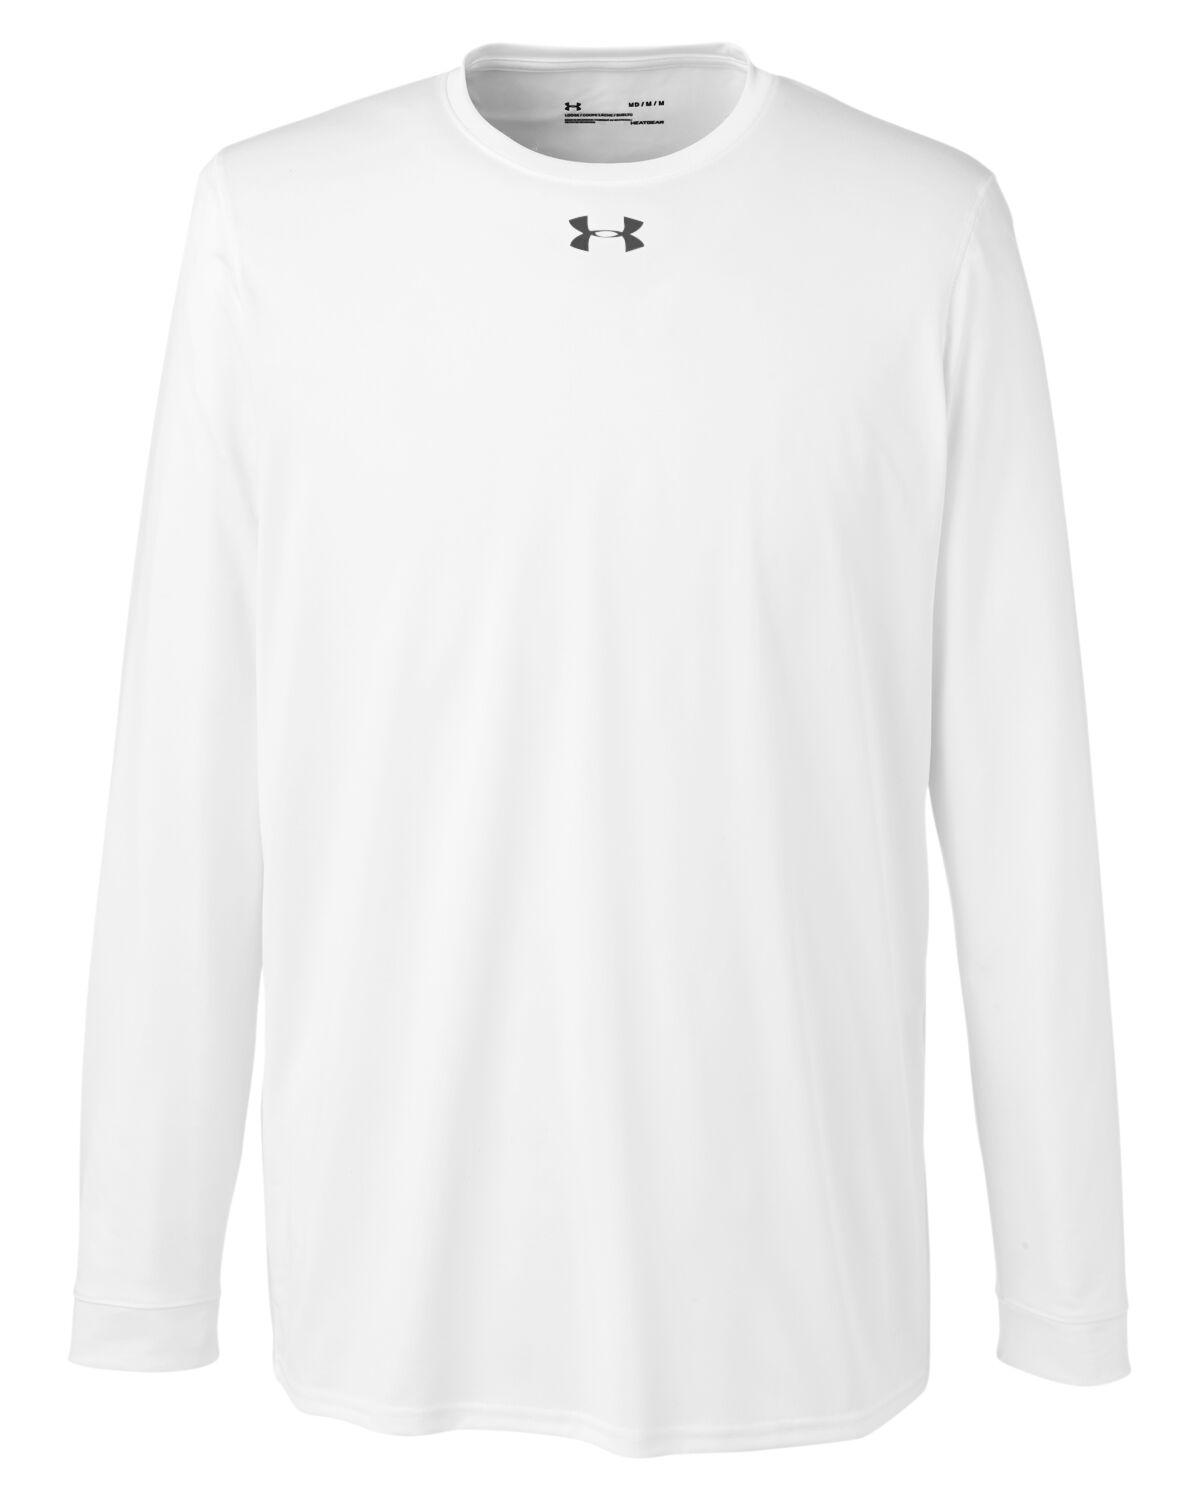 Custom Branded Under Armour T-Shirts - White/Graphite